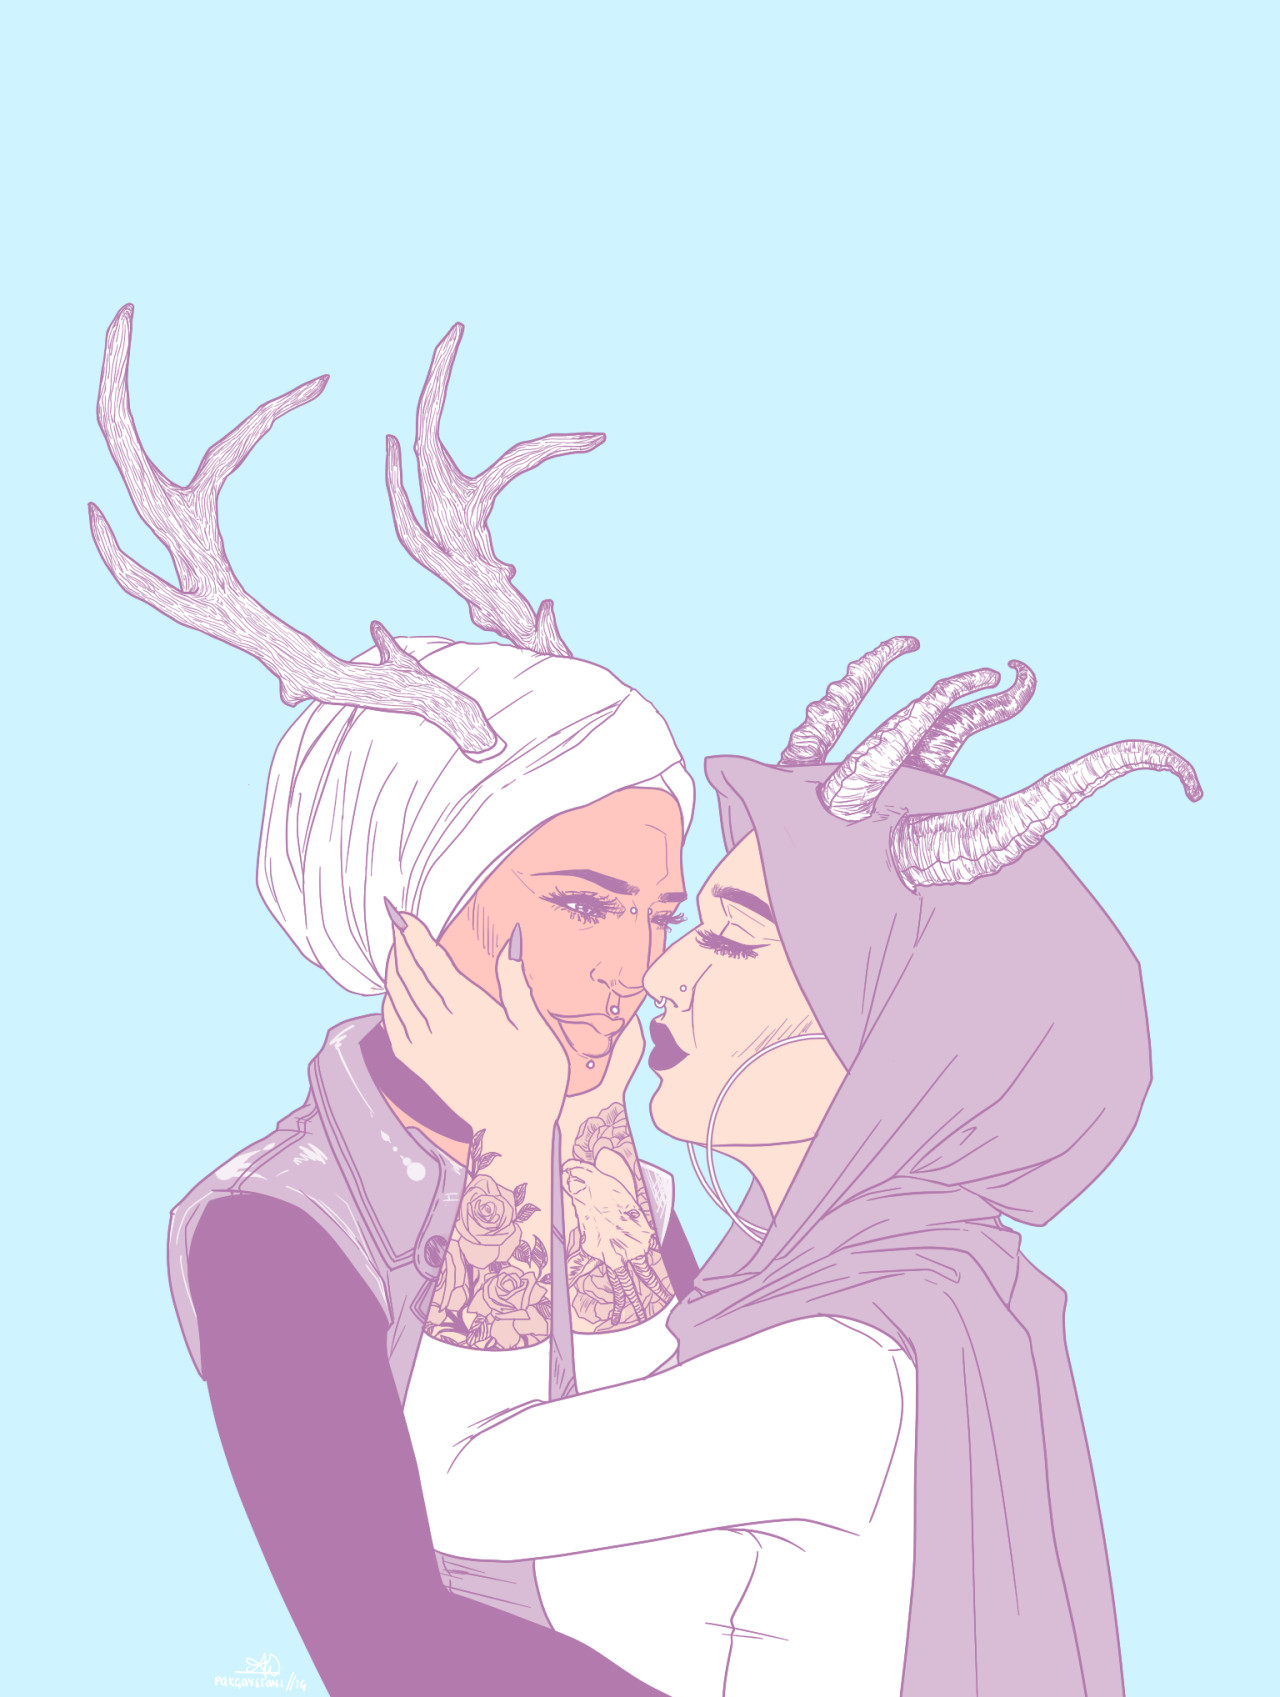 pakgaystani inner me told me to draw more gay hijabis also hello i